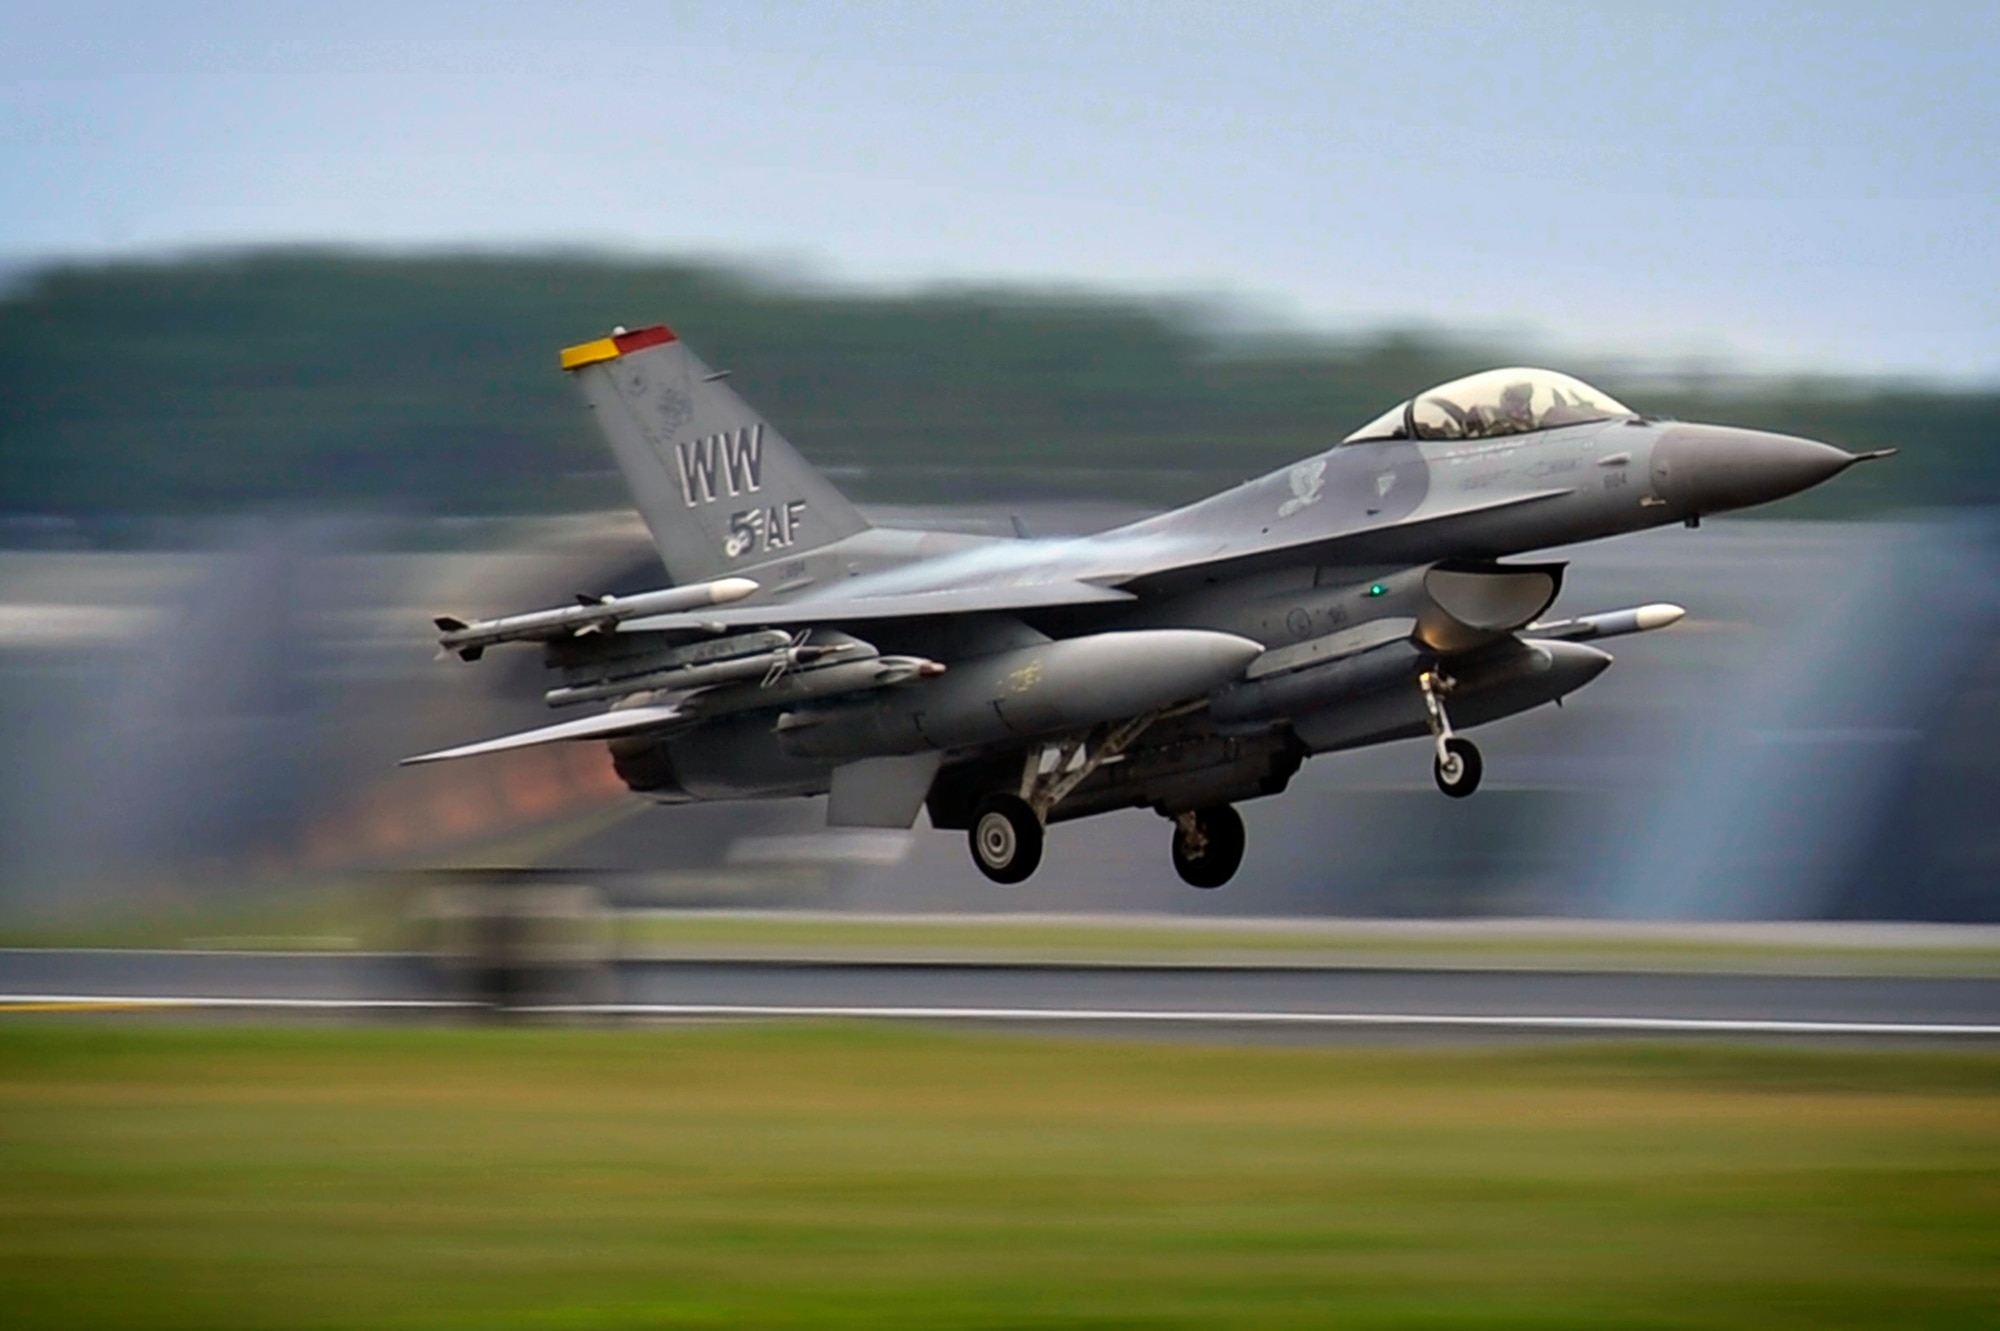 An F-16 Fighting Falcon from the 35th Fighter Wing takes off at Misawa Air Base, Japan, June 28, 2013. Pilots from the 35th Fighter Wing flew to Draughon Range to test their efficiency on engaging ground targets. (U.S. Air Force photo by Staff Sgt. Nathan Lipscomb)